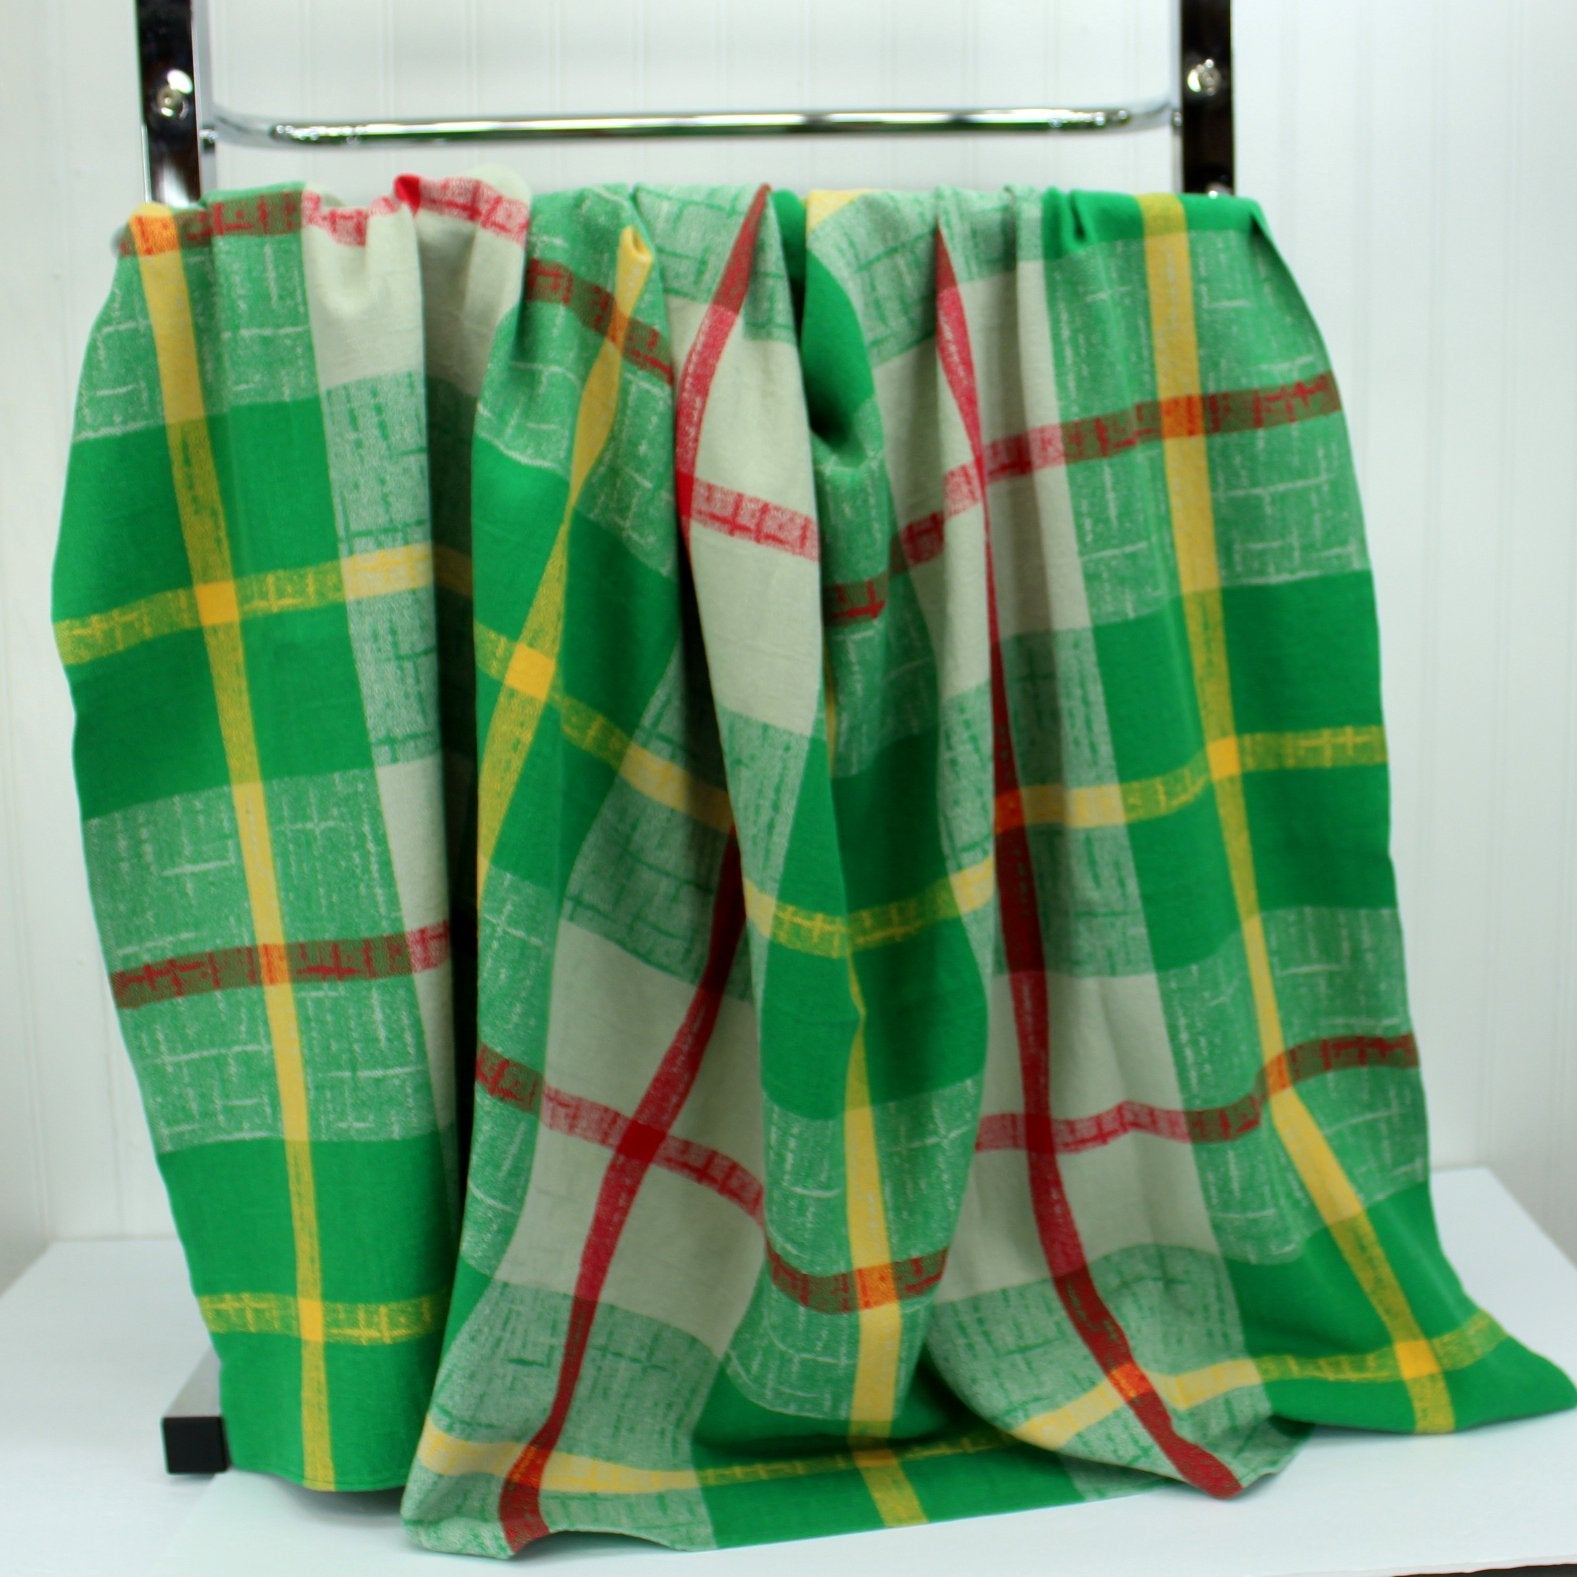 Simtex MCM Tablecloth Unusual Plaid Grey Green Red Cotton Heavy Weave